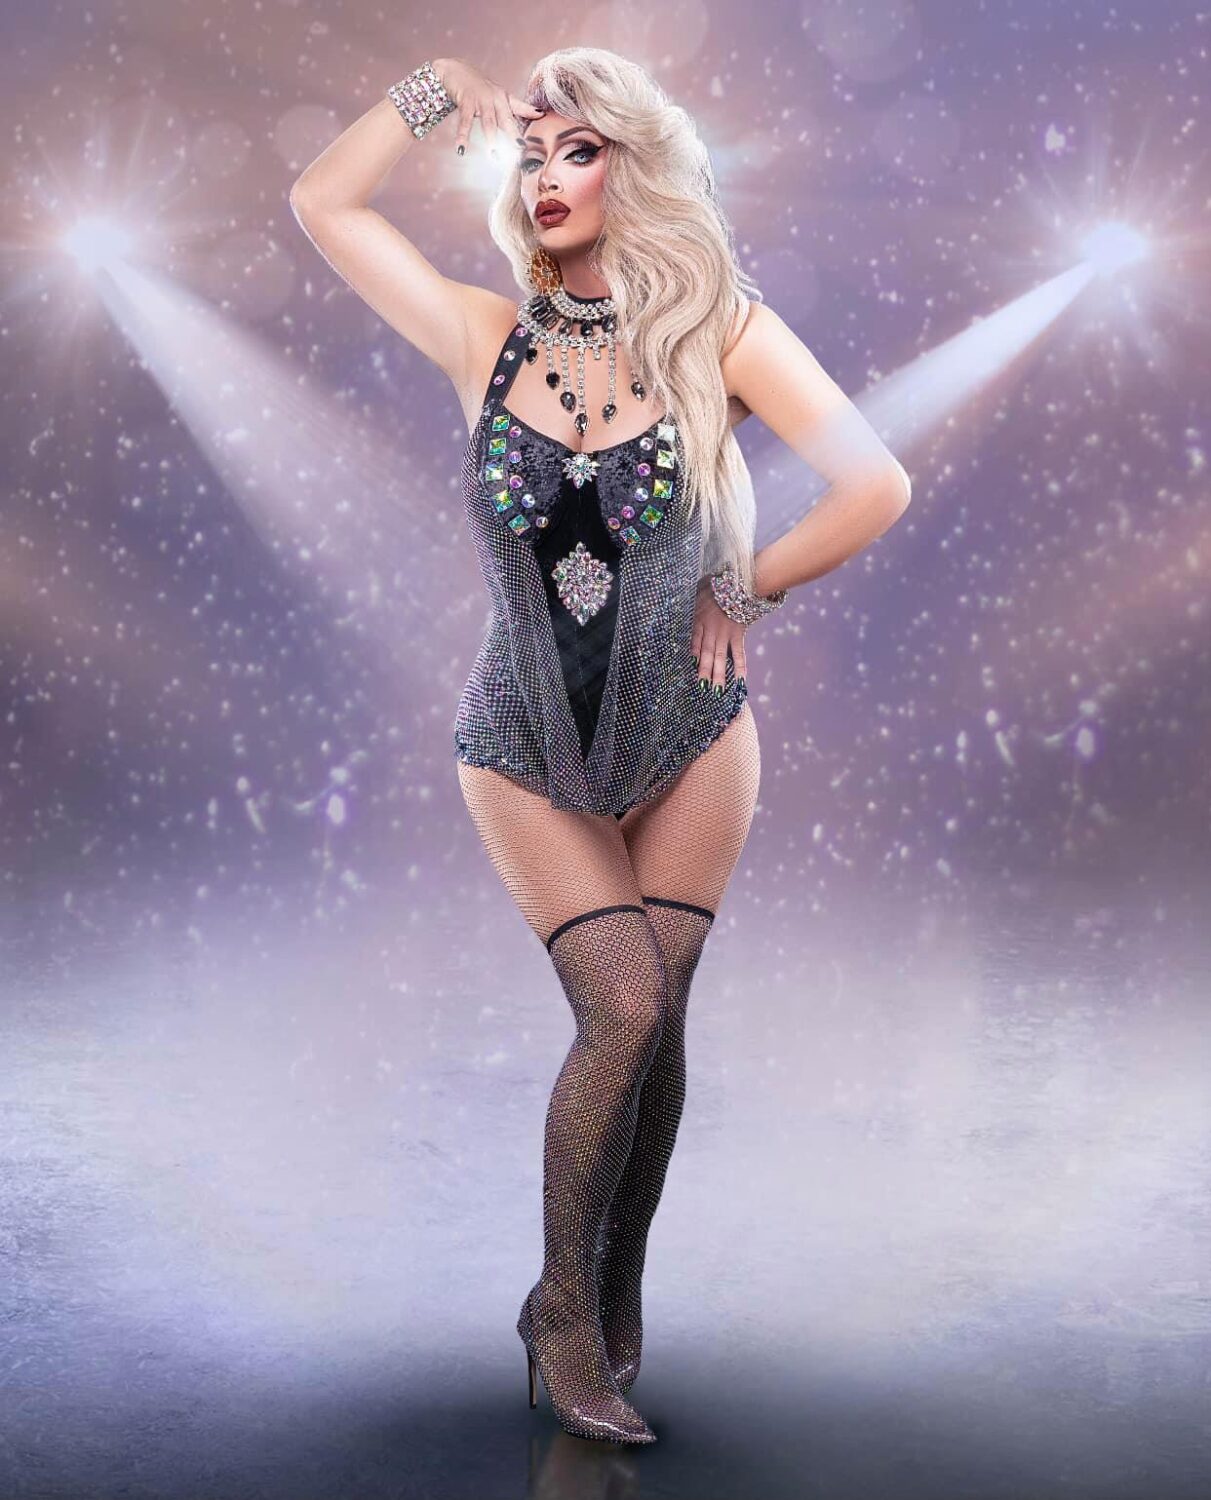 Kat Kelly - Photo by the Drag Photographer